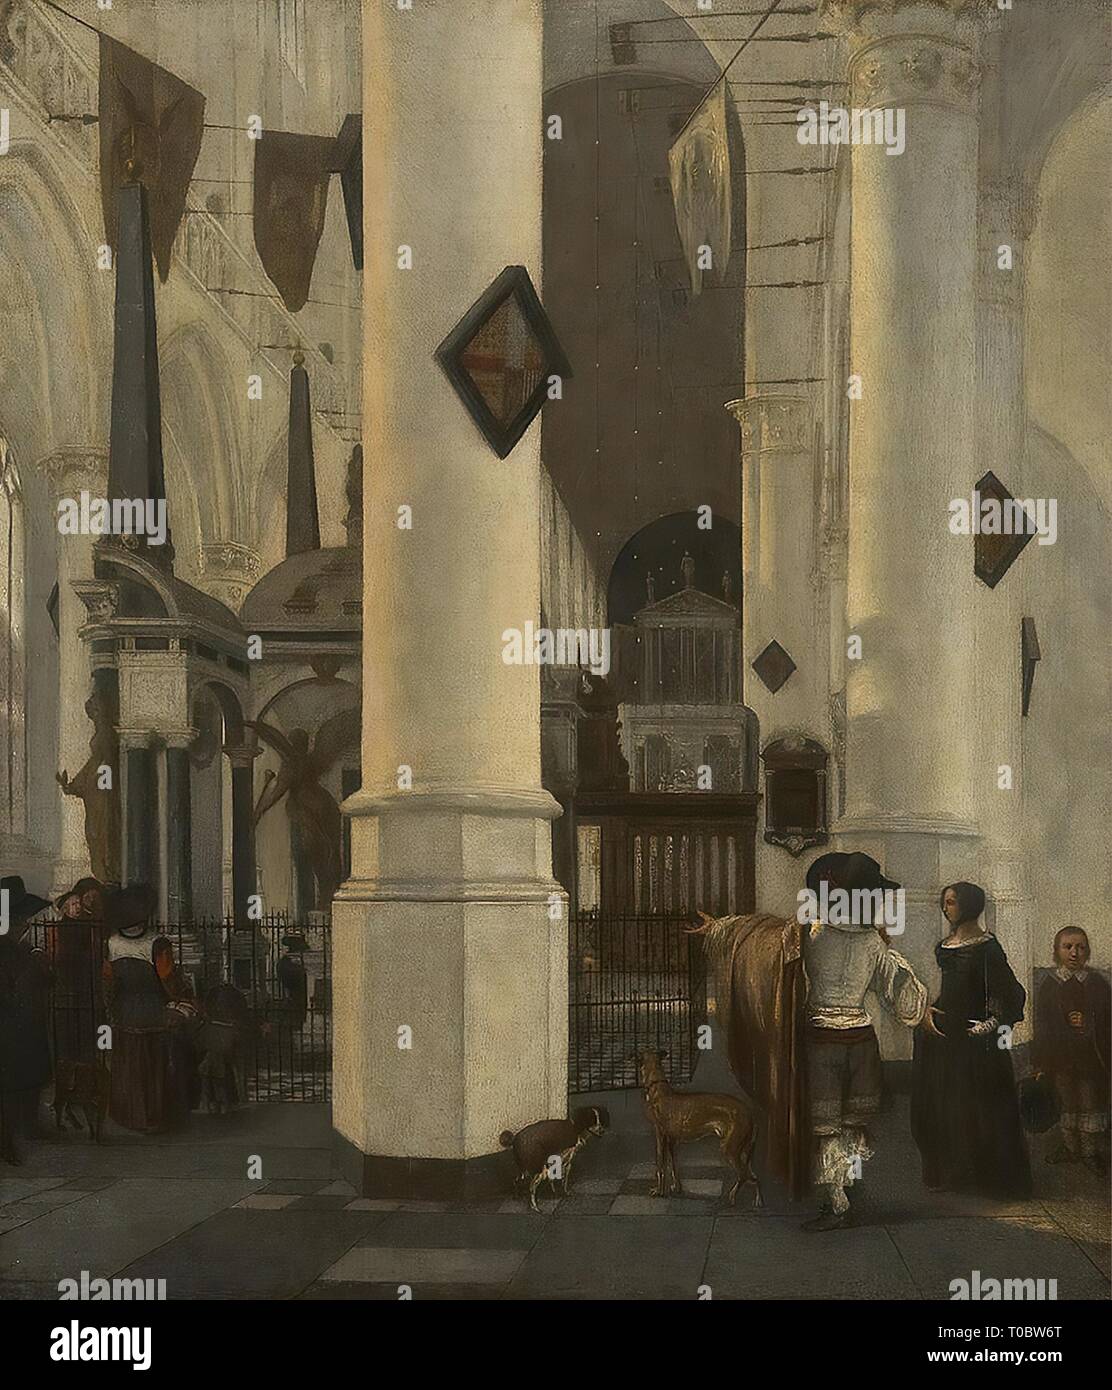 'Old Church (Oudekerk) in Delft'. Holland. Dimensions: 95x82 cm. Museum: State Hermitage, St. Petersburg. Author: EMANUEL DE WITTE. Stock Photo